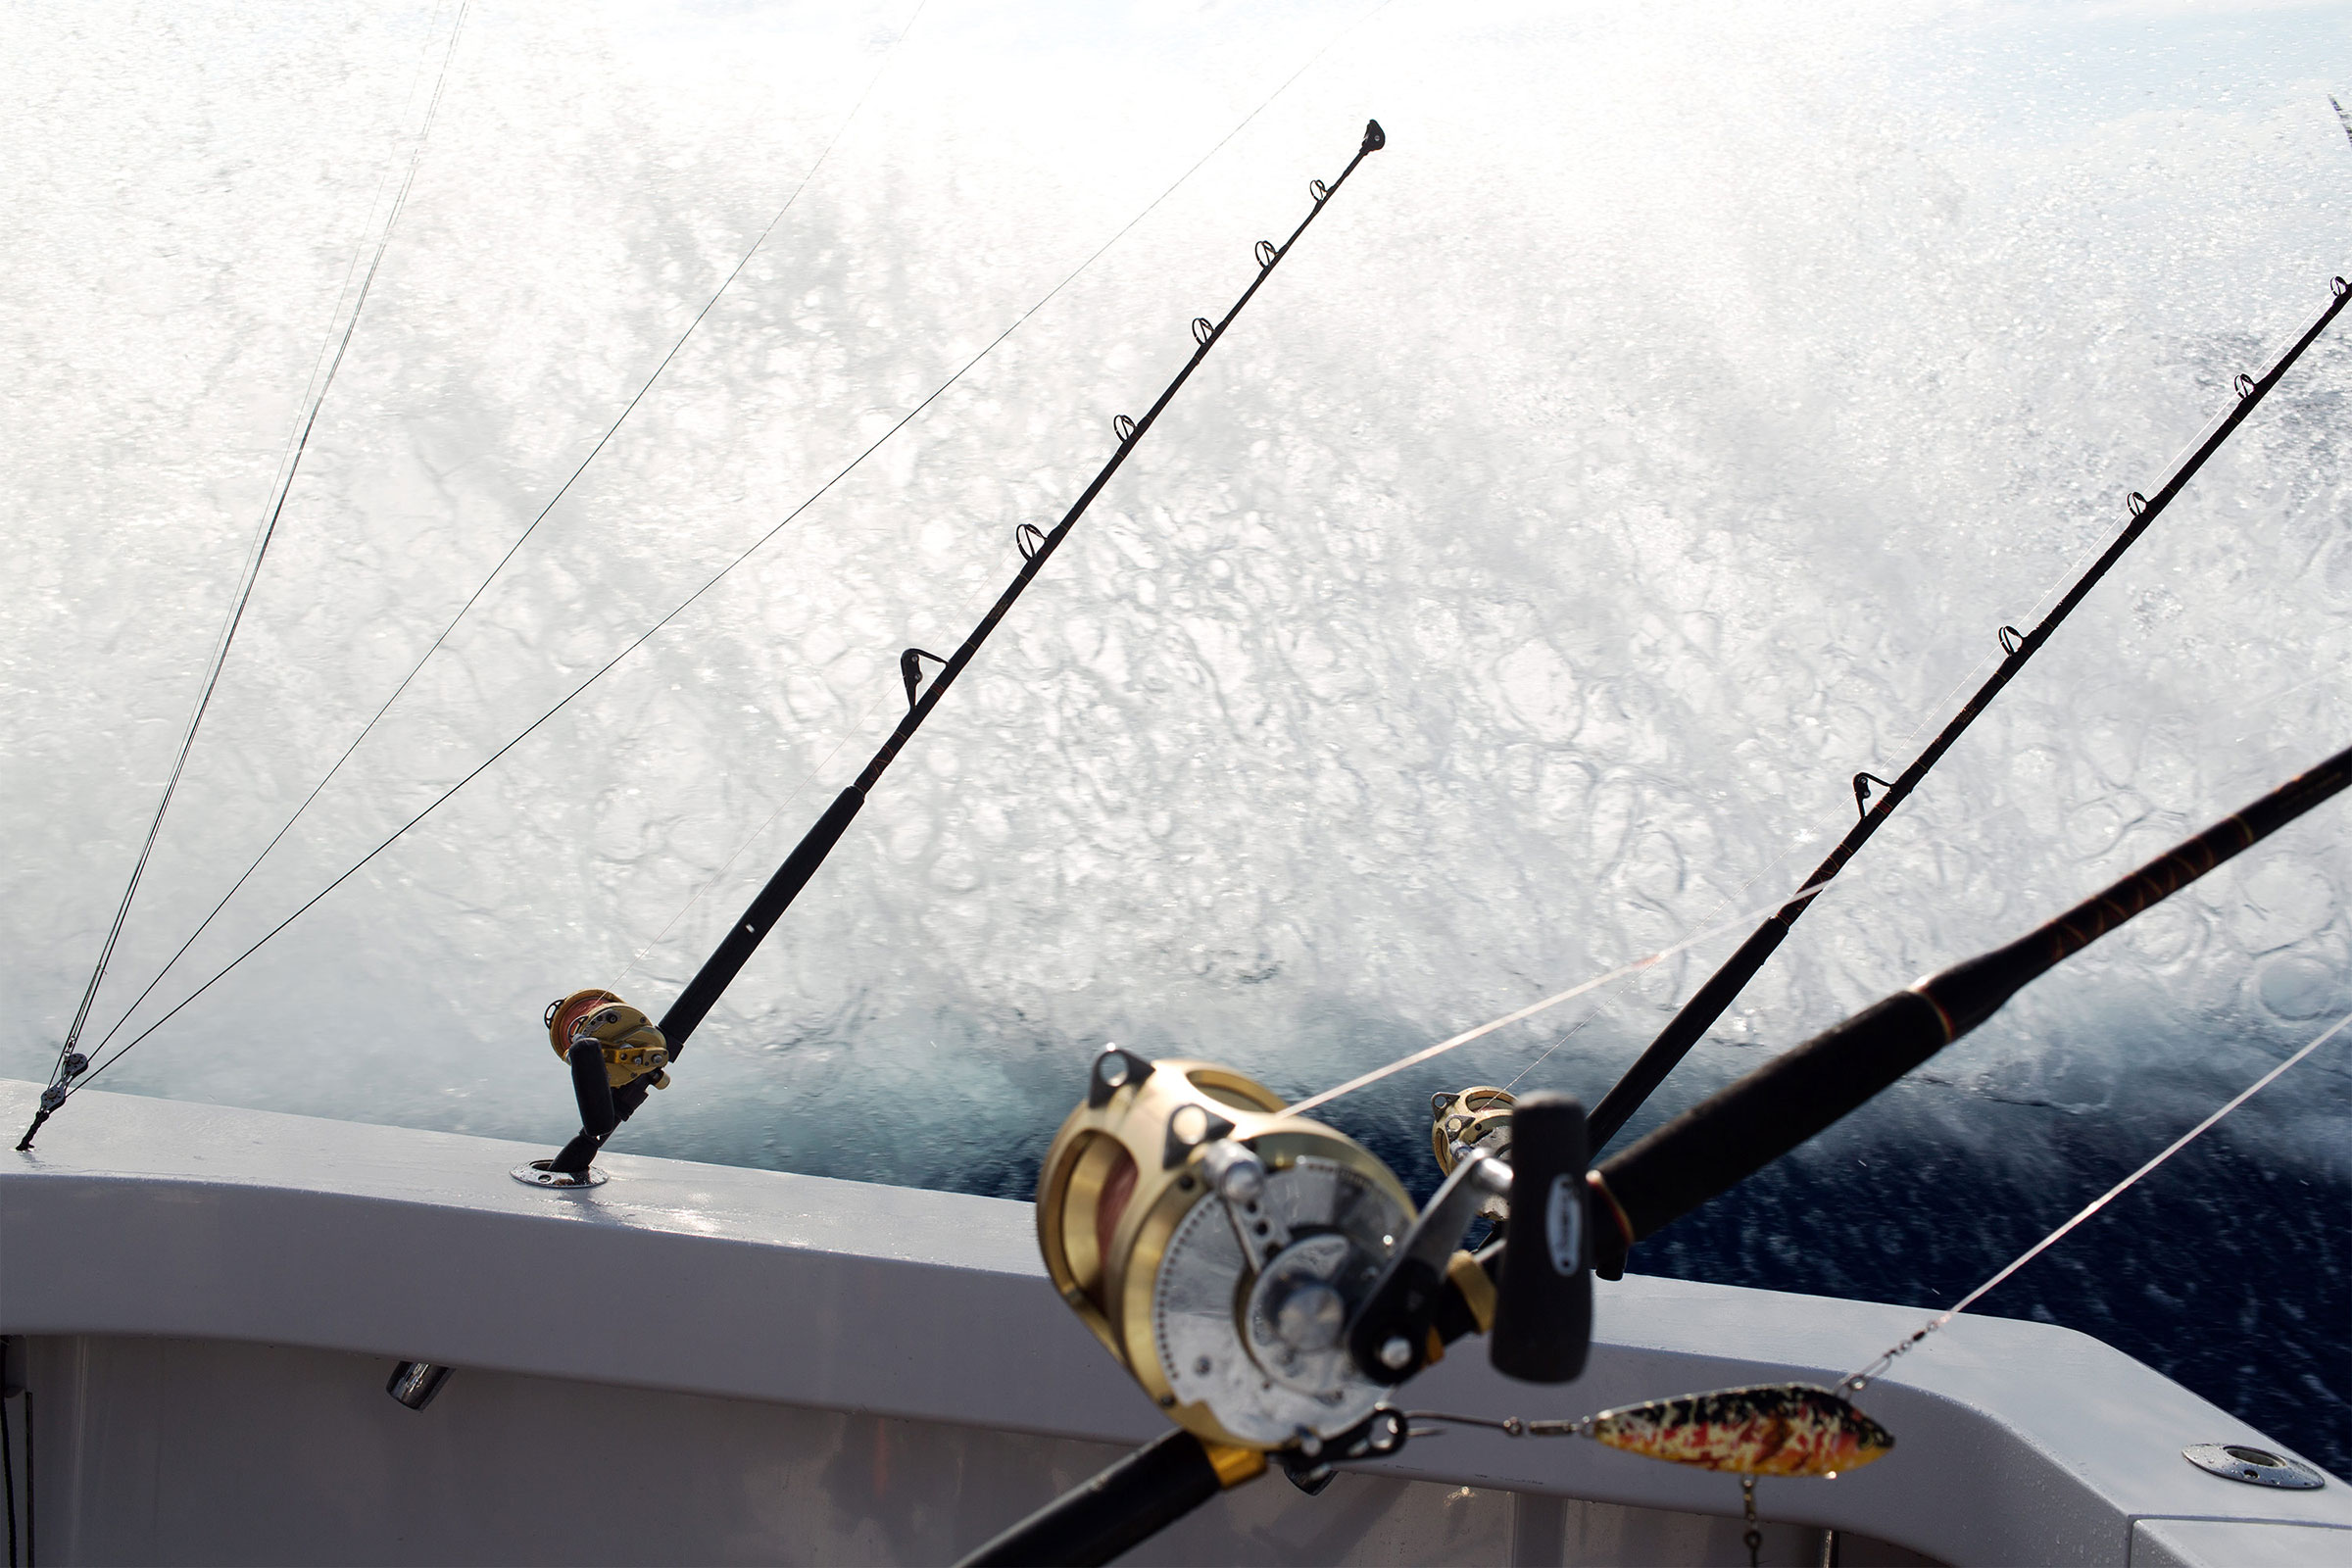 Offshore fishing off the coast of South Florida and The Bahamas. Documenting fishermen after tuna, dolphin, mahi and storms across the Atlantic.